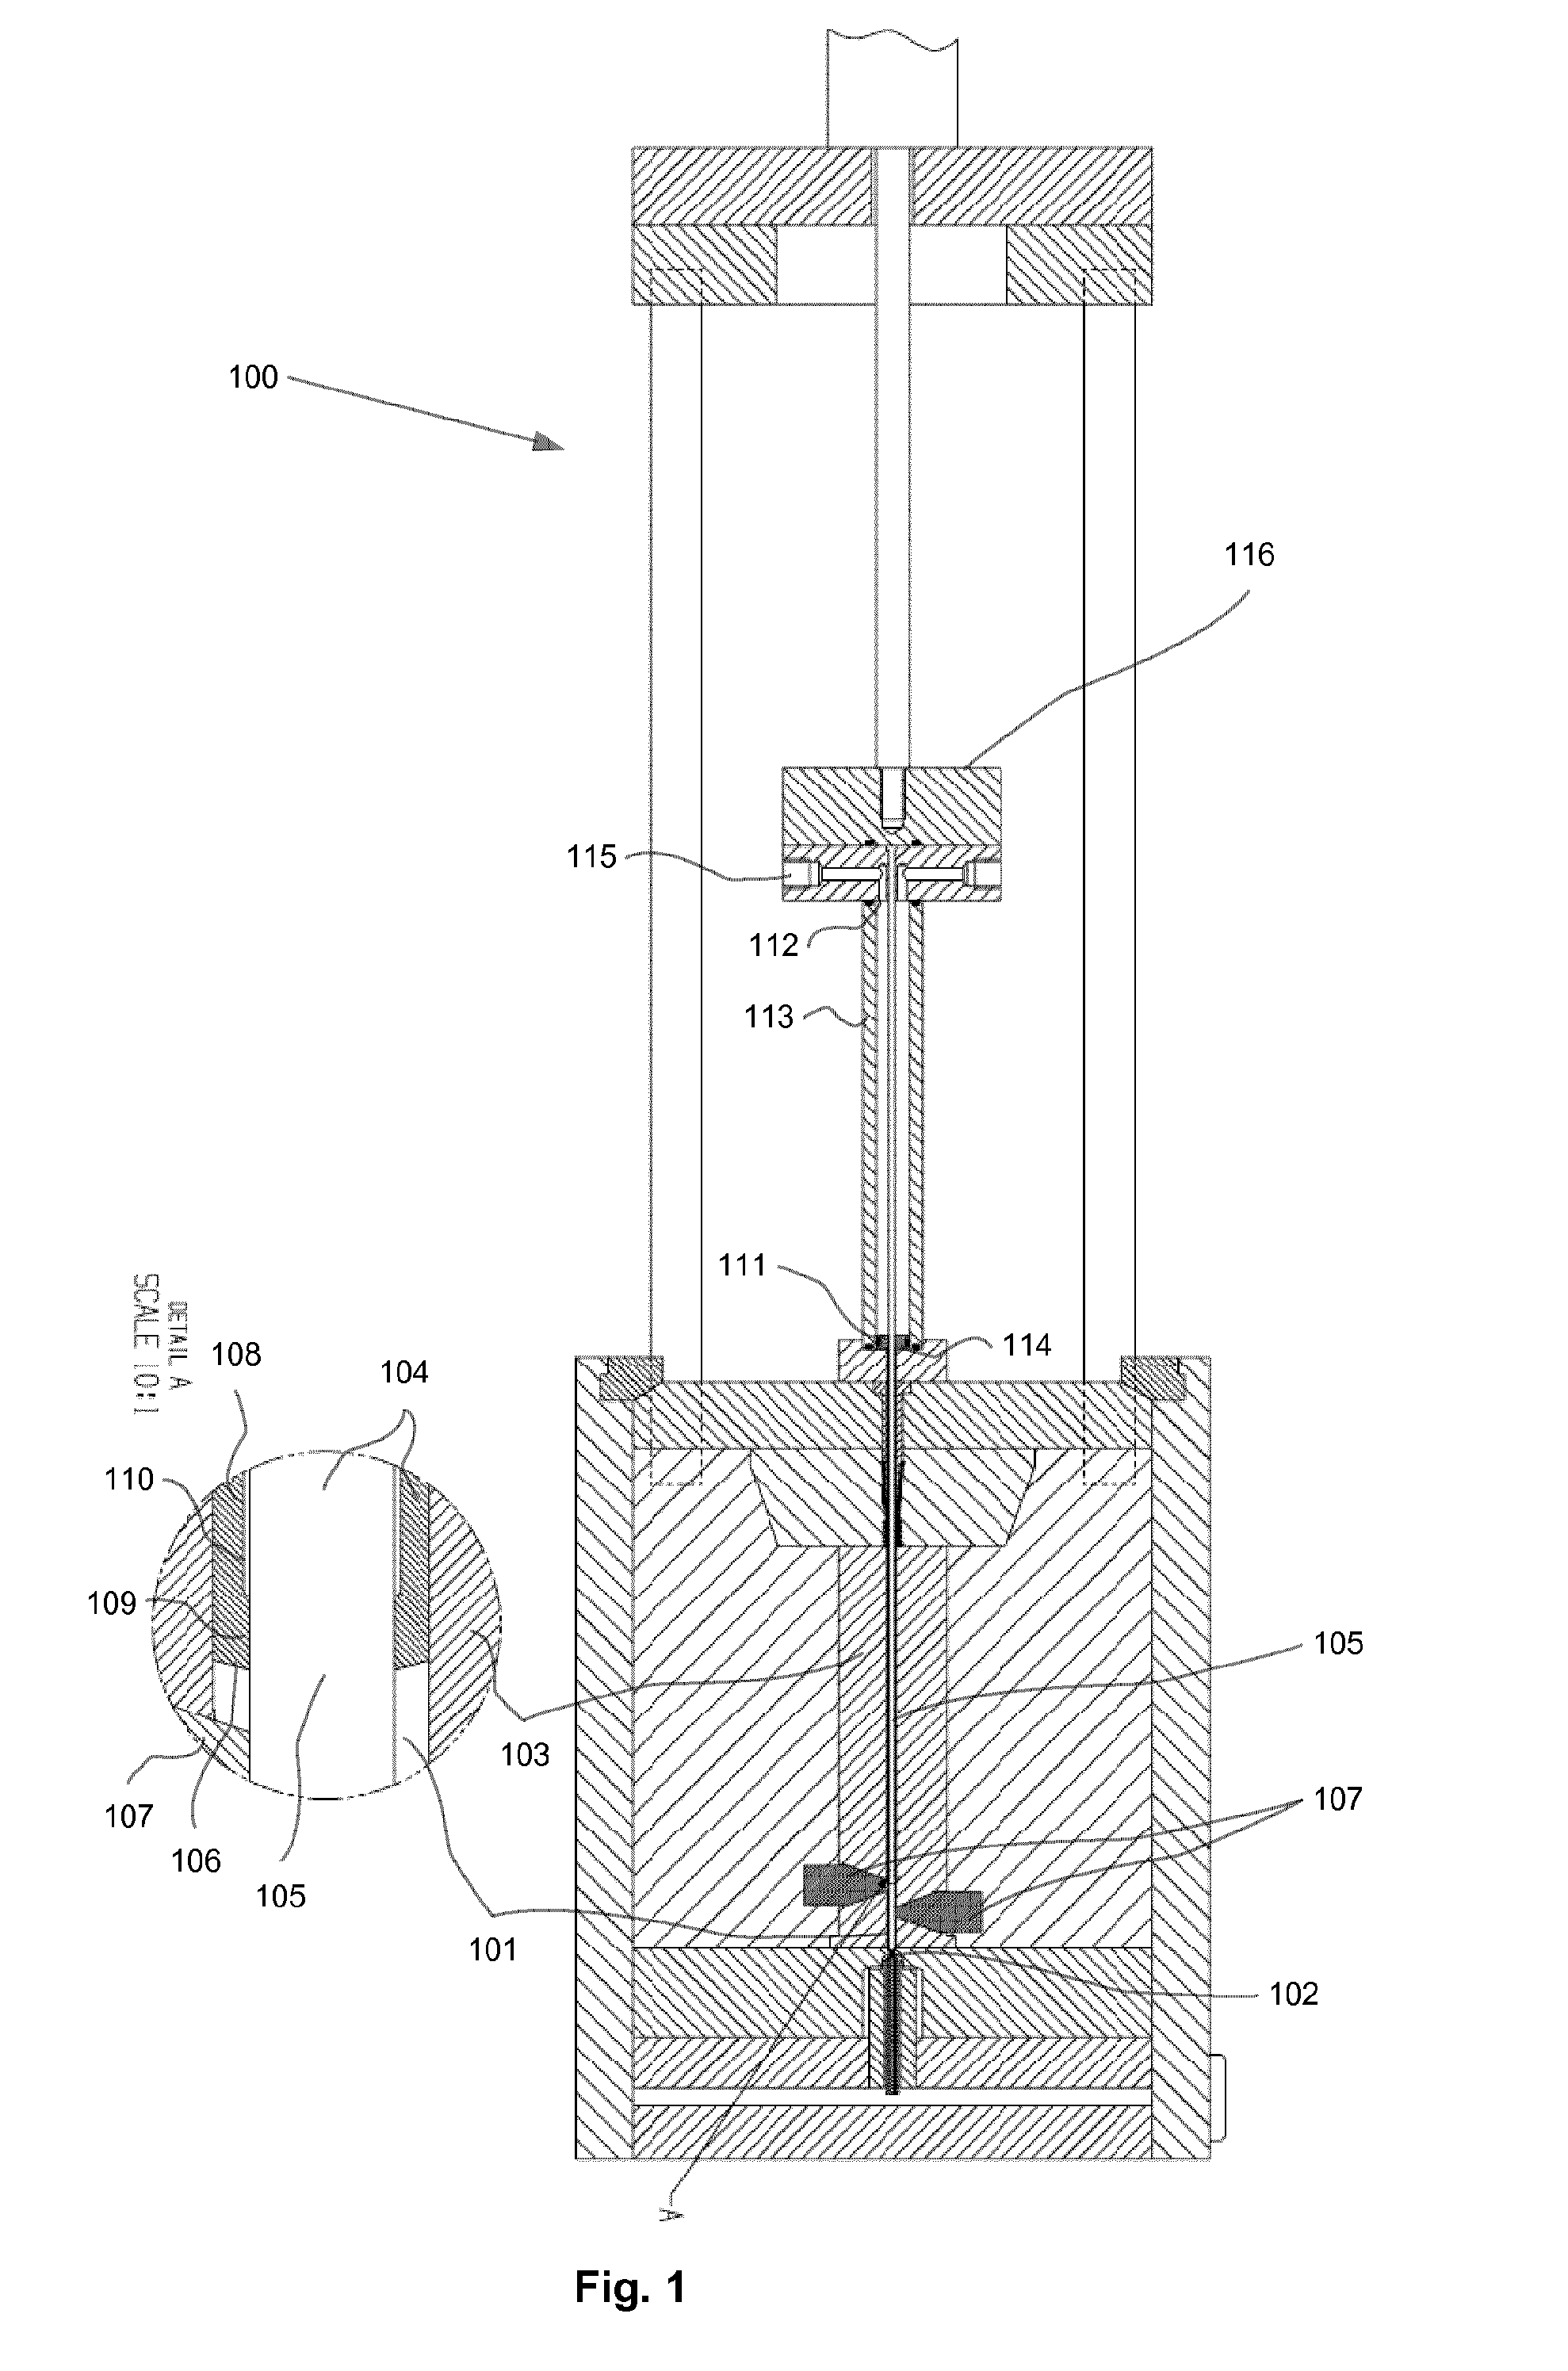 Method for manufacturing of urinary catheters